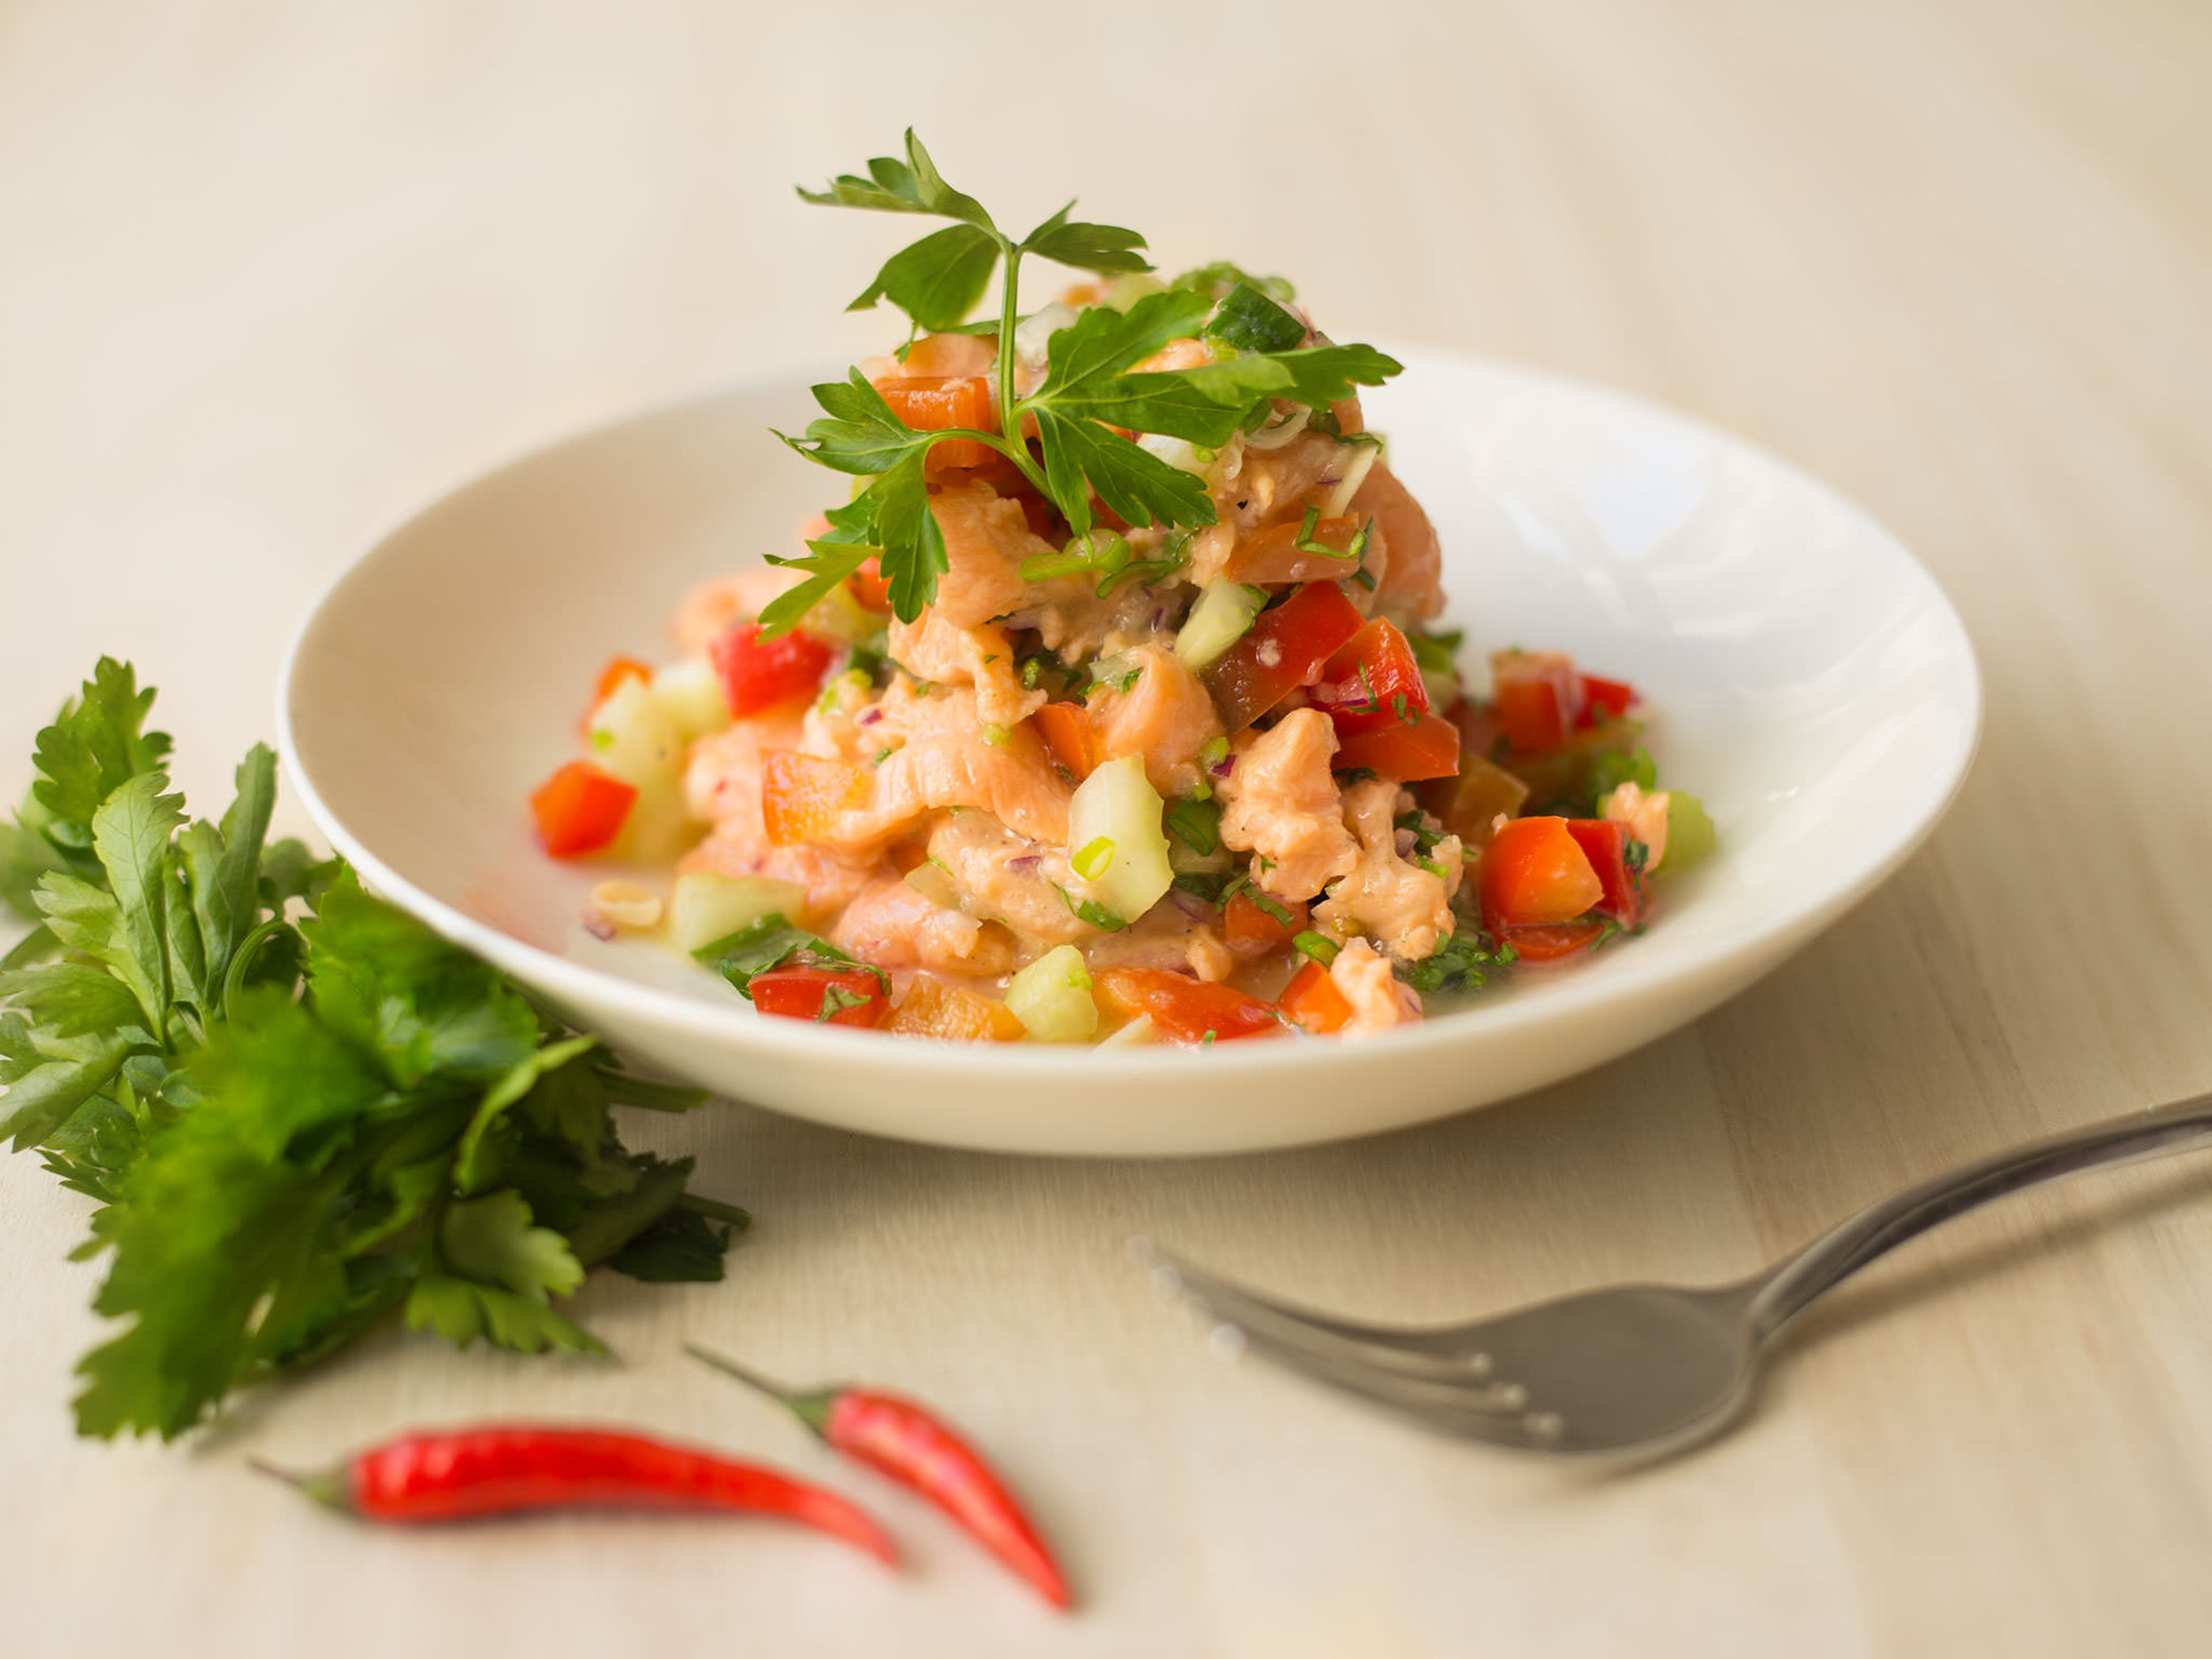 Sommer-Ceviche